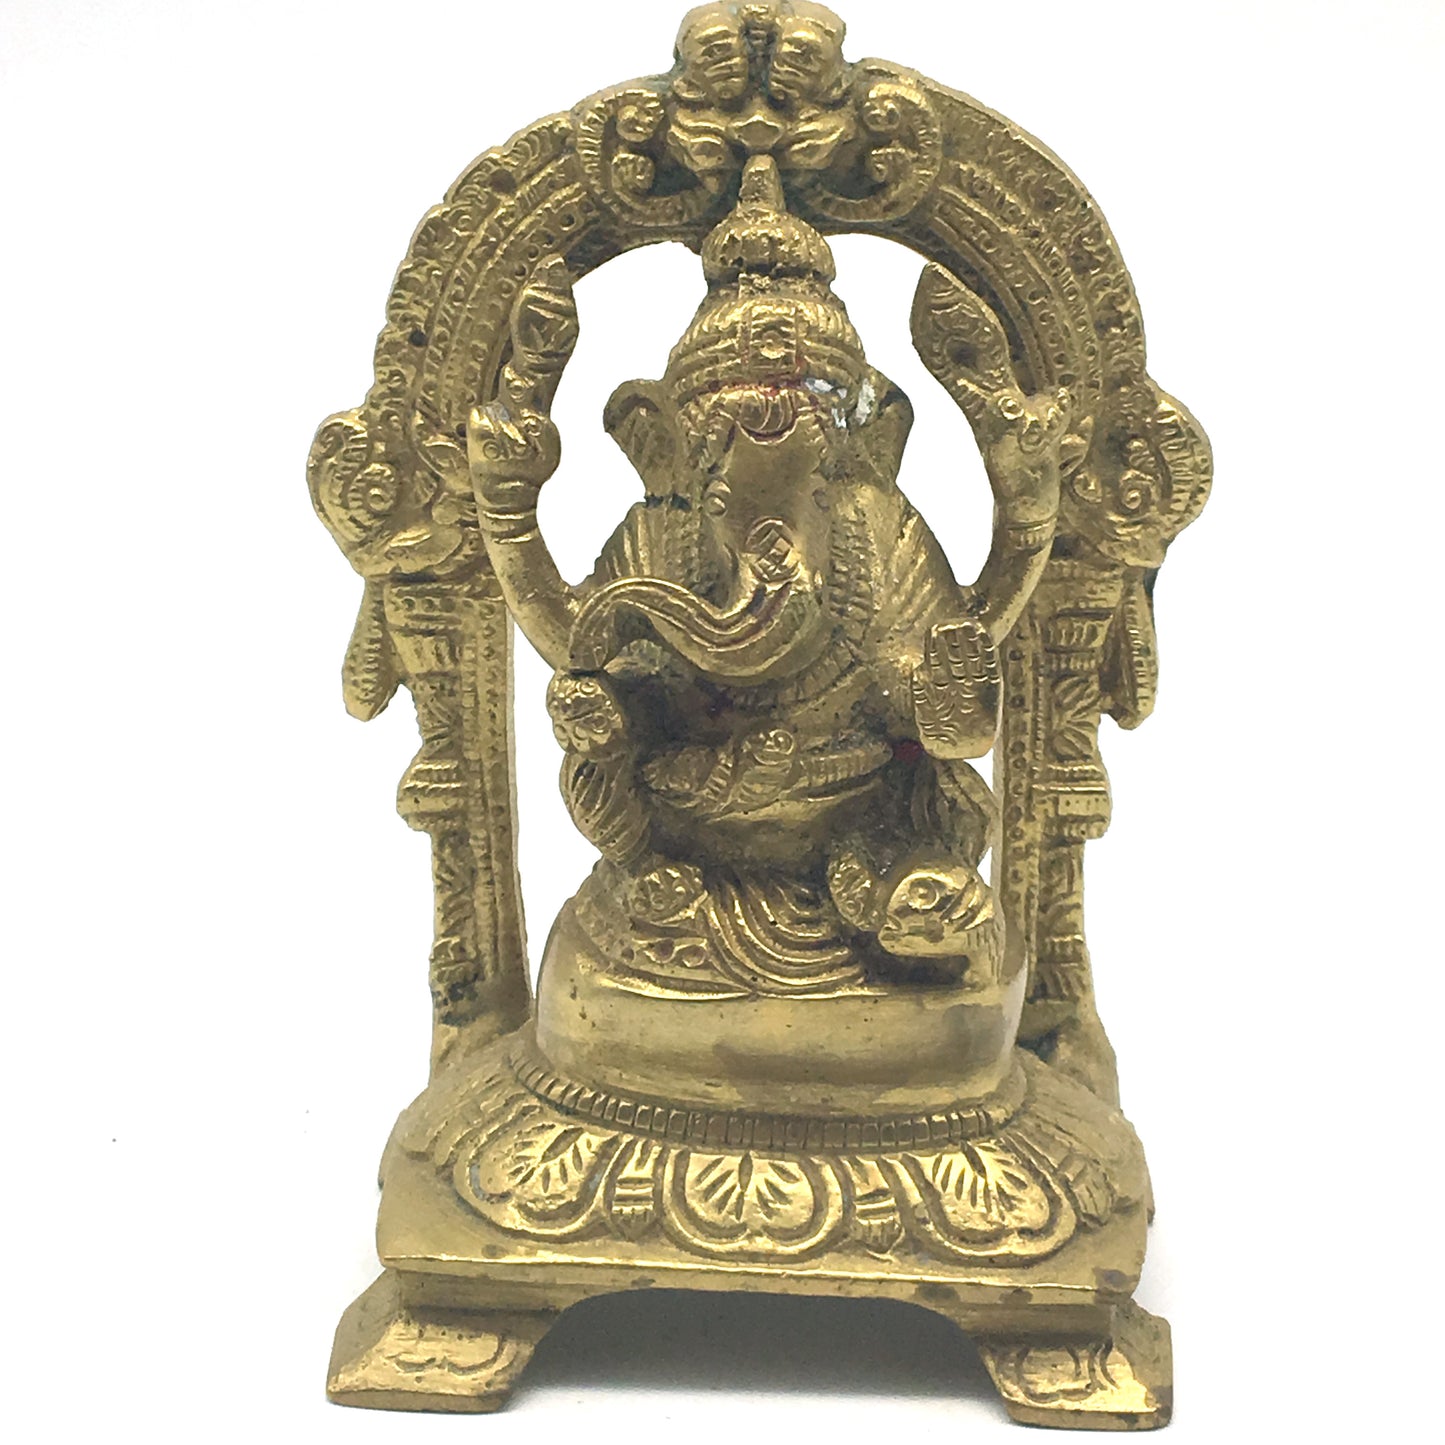 Handcrafted Brass Ganesh Ganapati India Elephant God Statue – Obstacle Remover - Montecinos Ethnic